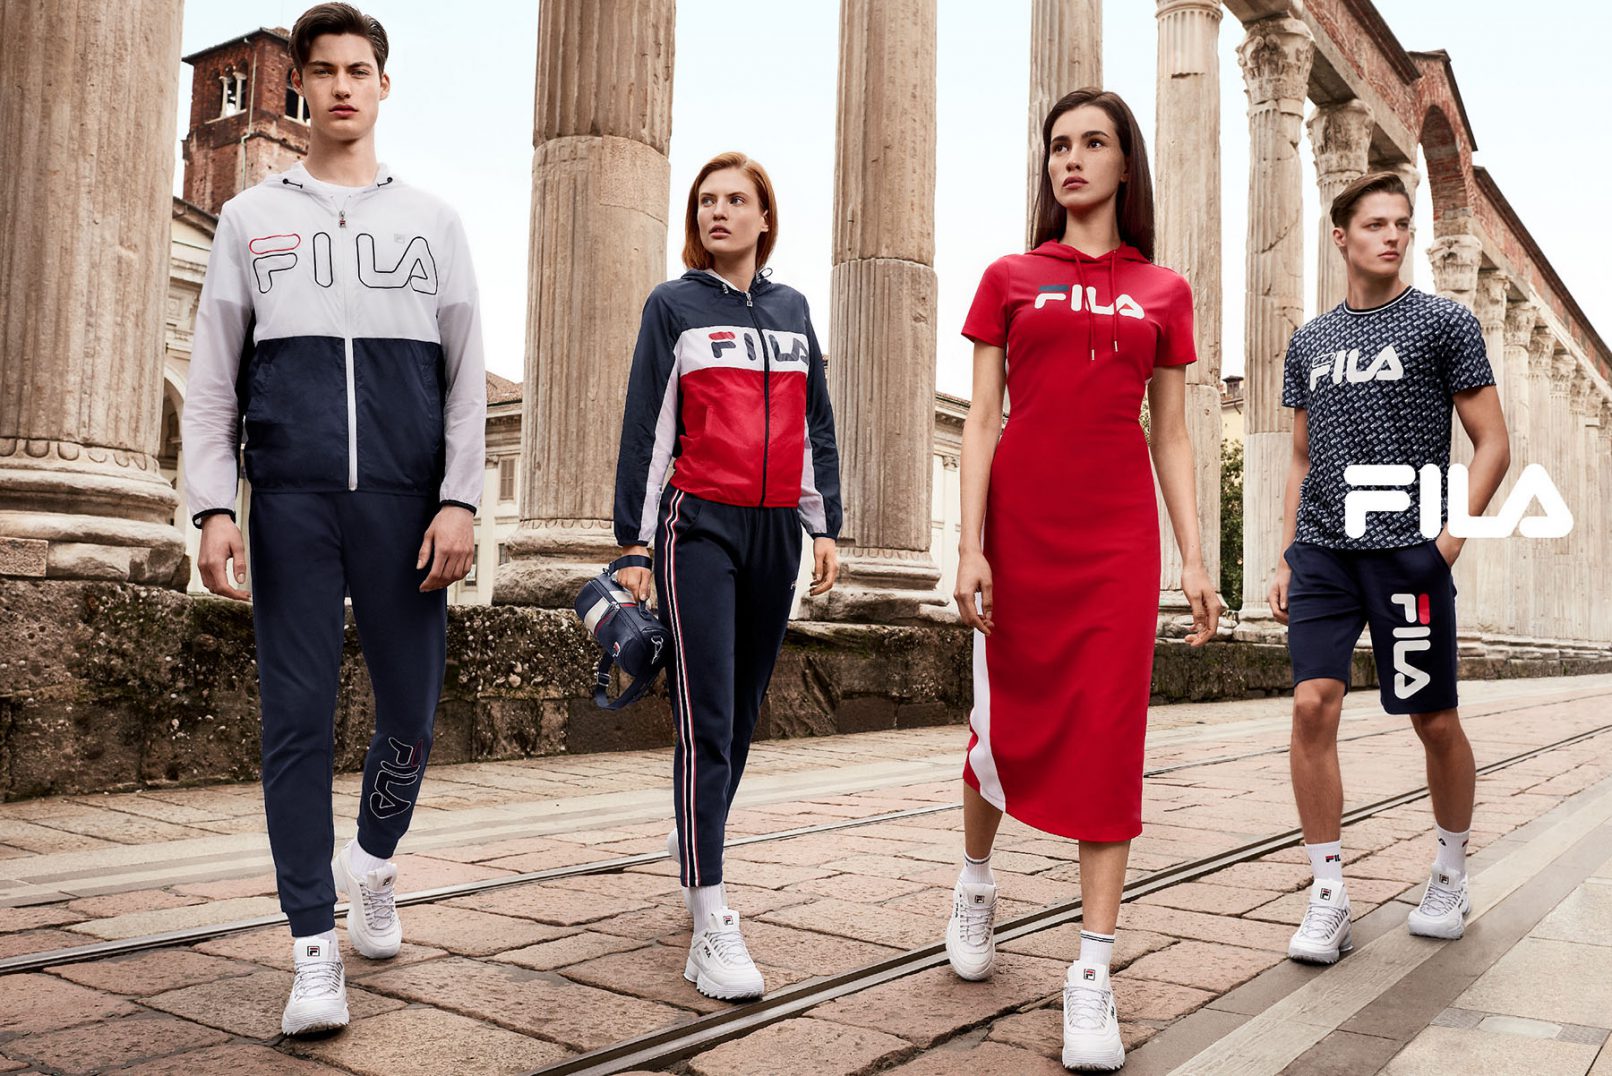 Fila Cina AW 2018 Advertising image shot in Milan by portrait, advertising and commercial photographer David Umberto Zappa. Talents posing in front of Colonne di S. Lorenzo in Milan. Immagine pubblicitaria scattata da David Umberto Zappa, fotografo commerciale, pubblicitario, editoriale presso le Colonne di S. Lorenzo a Milano.